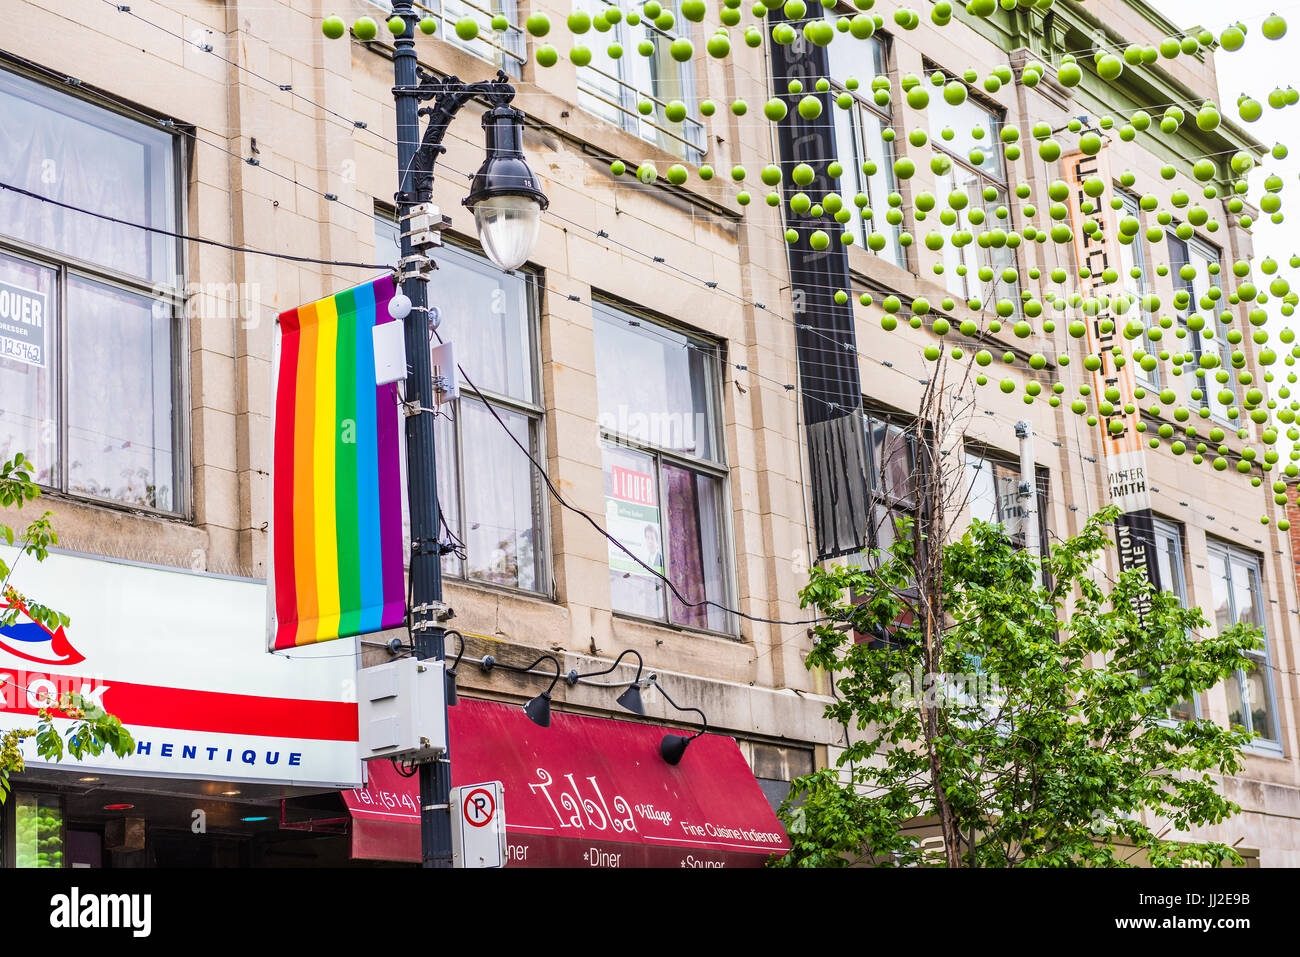 Montreal, Canada - May 26, 2017: Sainte Catherine street in Montreal's Gay Village in Quebec region with green hanging decorations and lgbt flag Stock Photo